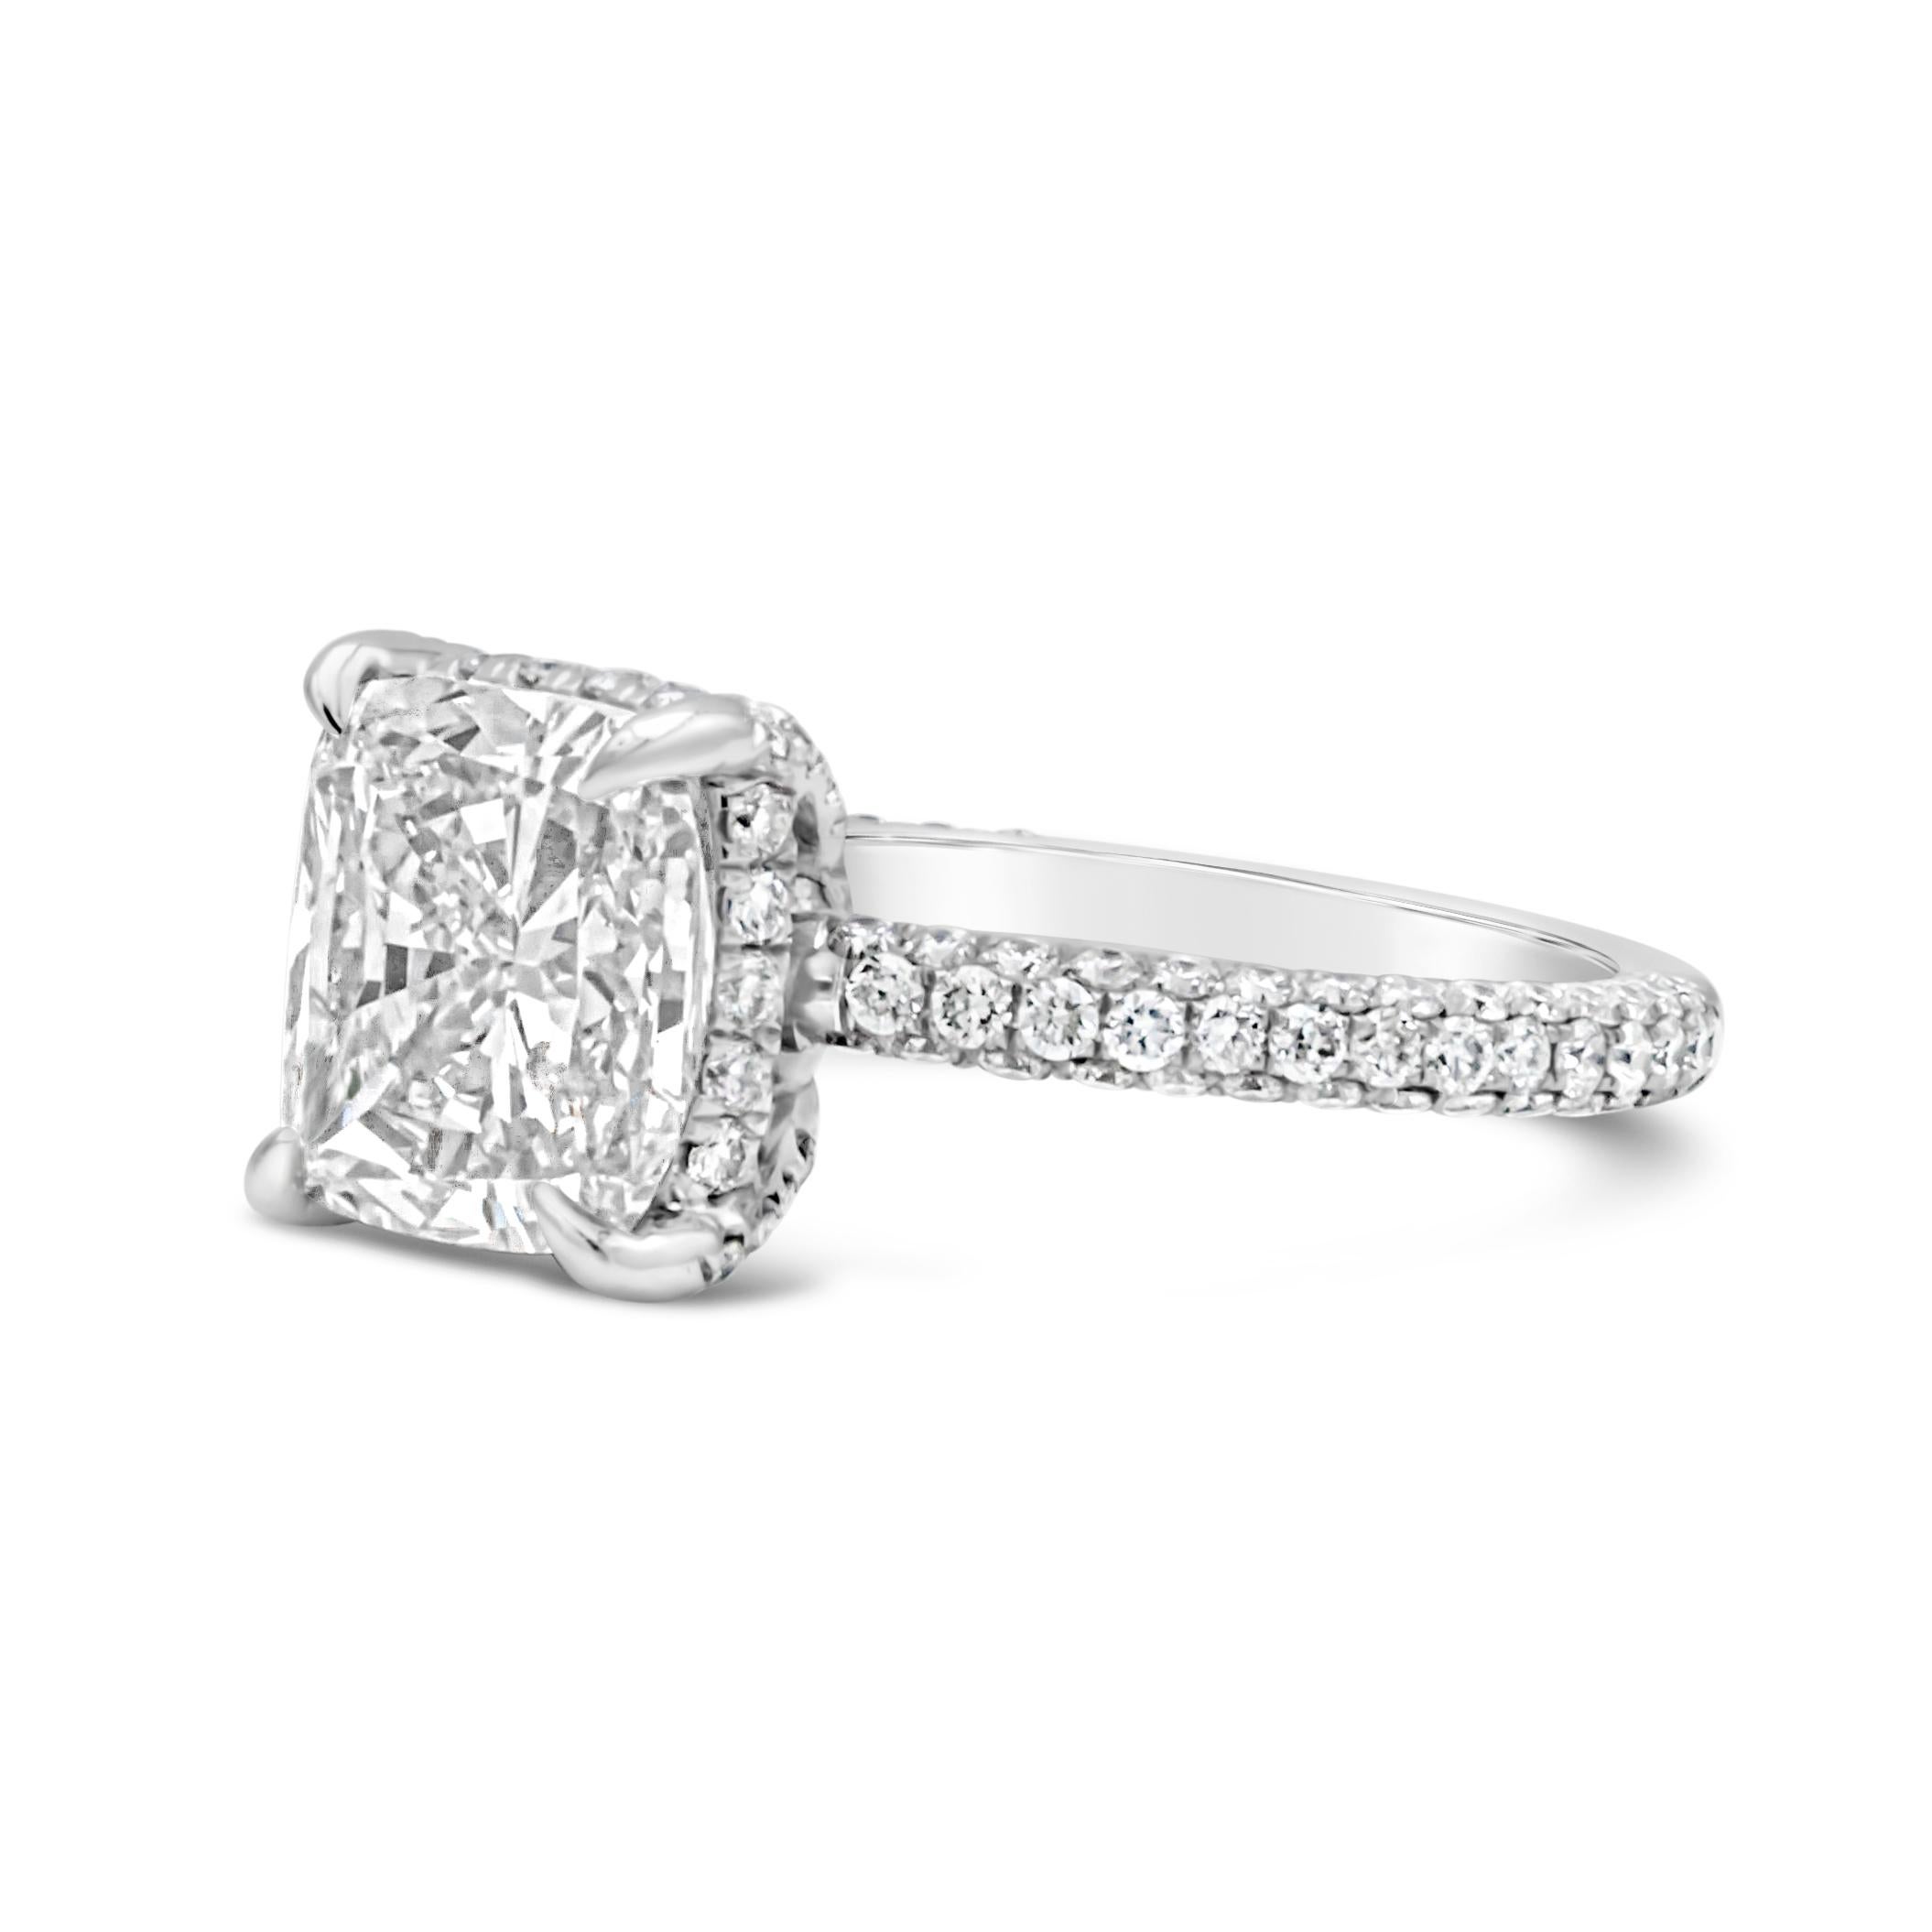 A classic and elegant piece of engagement ring showcasing a GIA Certified 3.01 carat cushion cut diamond, J Color and I1 in Clarity. 120 accent brilliant round diamonds are scalloped set 3/4 way down the band weighing 0.85 carats total. Finely made